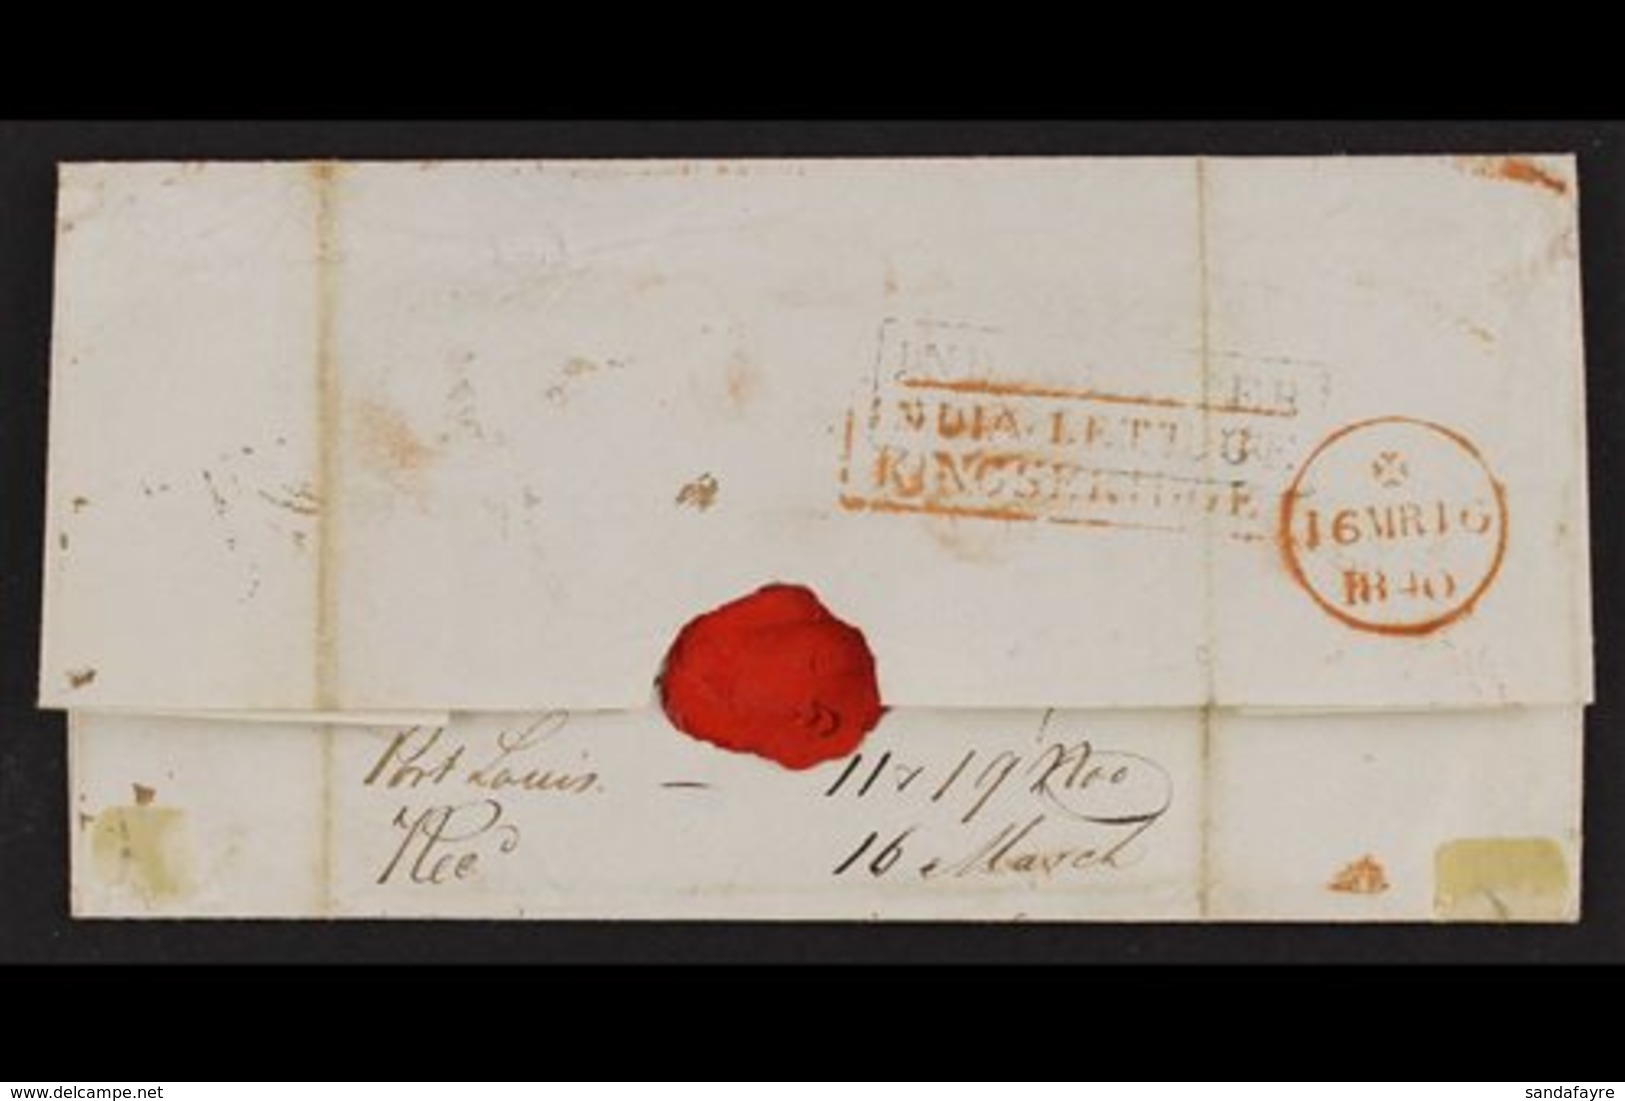 1839 (Nov) Wrapper "per Palmer" To Huff In London, Showing Red MAURITIUS POST OFFICE Cds, Various Rate Endorsements, And - Maurice (...-1967)